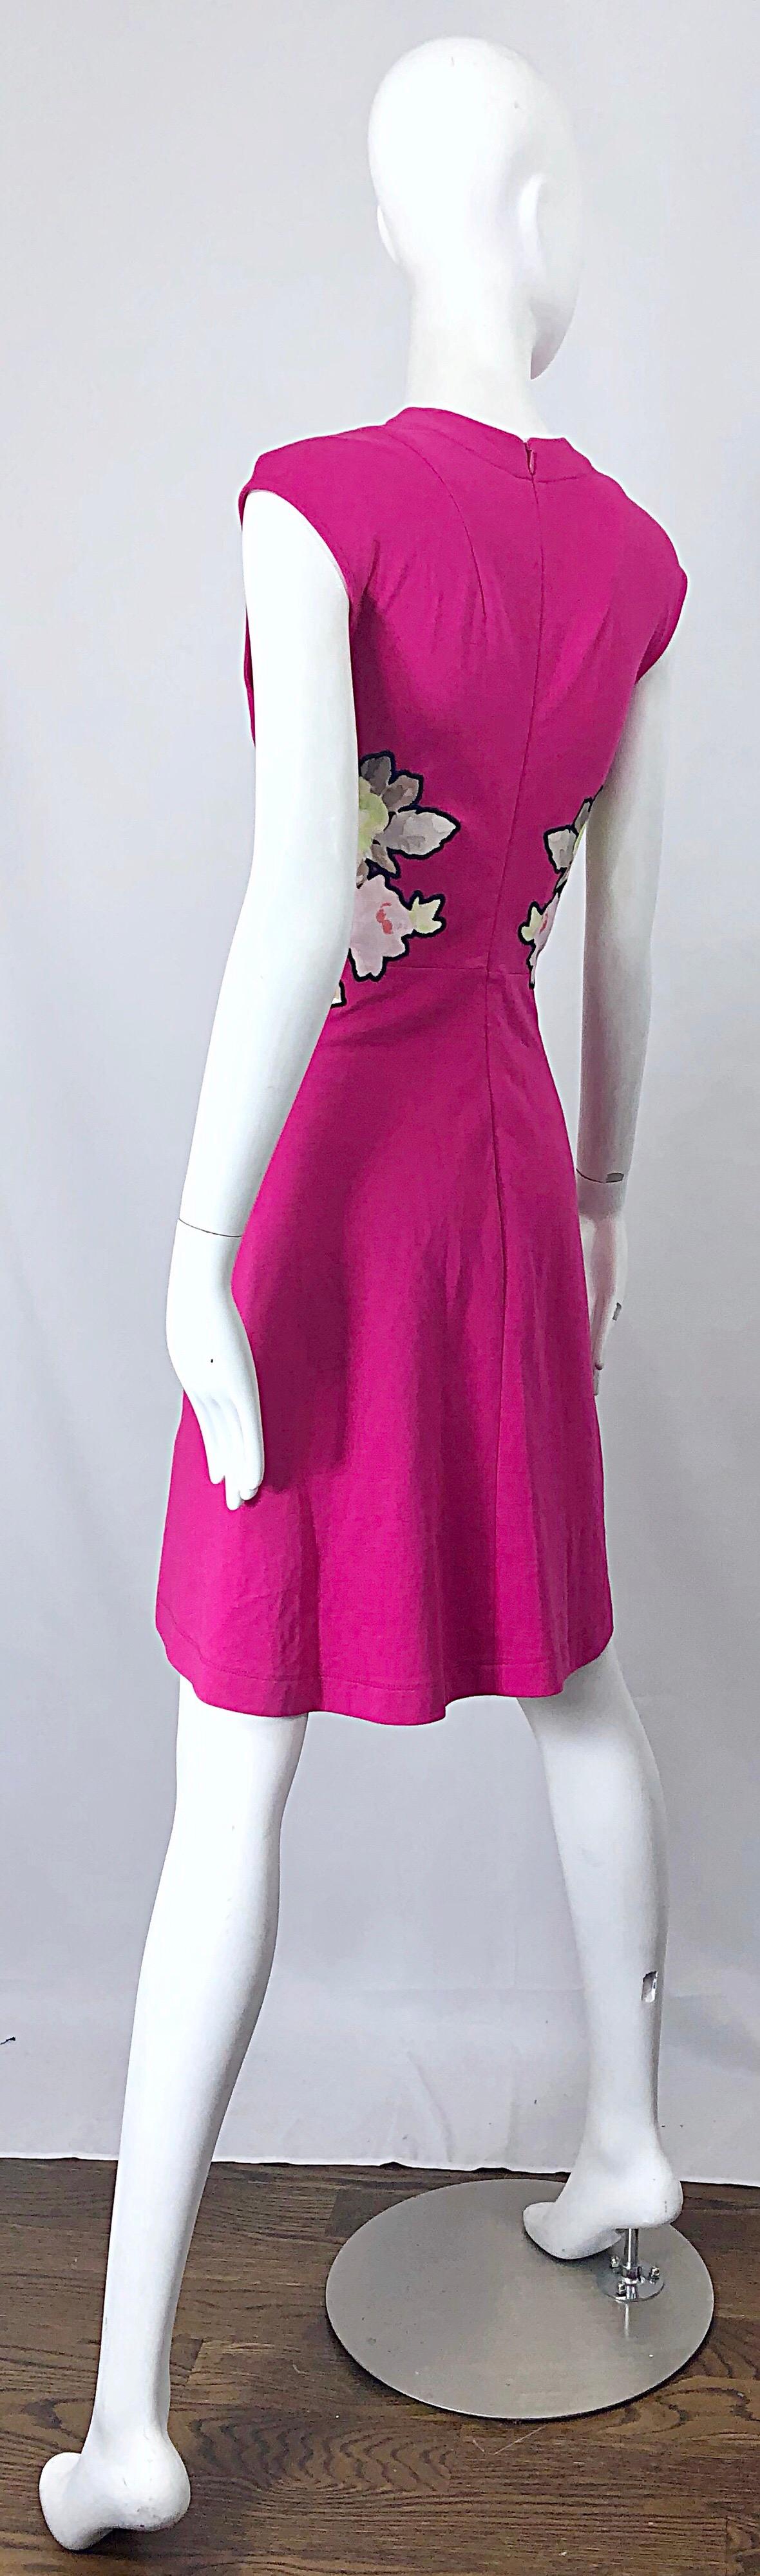 Carven Hot Pink Bouquet of Roses Sleeveless Cotton A - Line Dress Size Medium For Sale 2